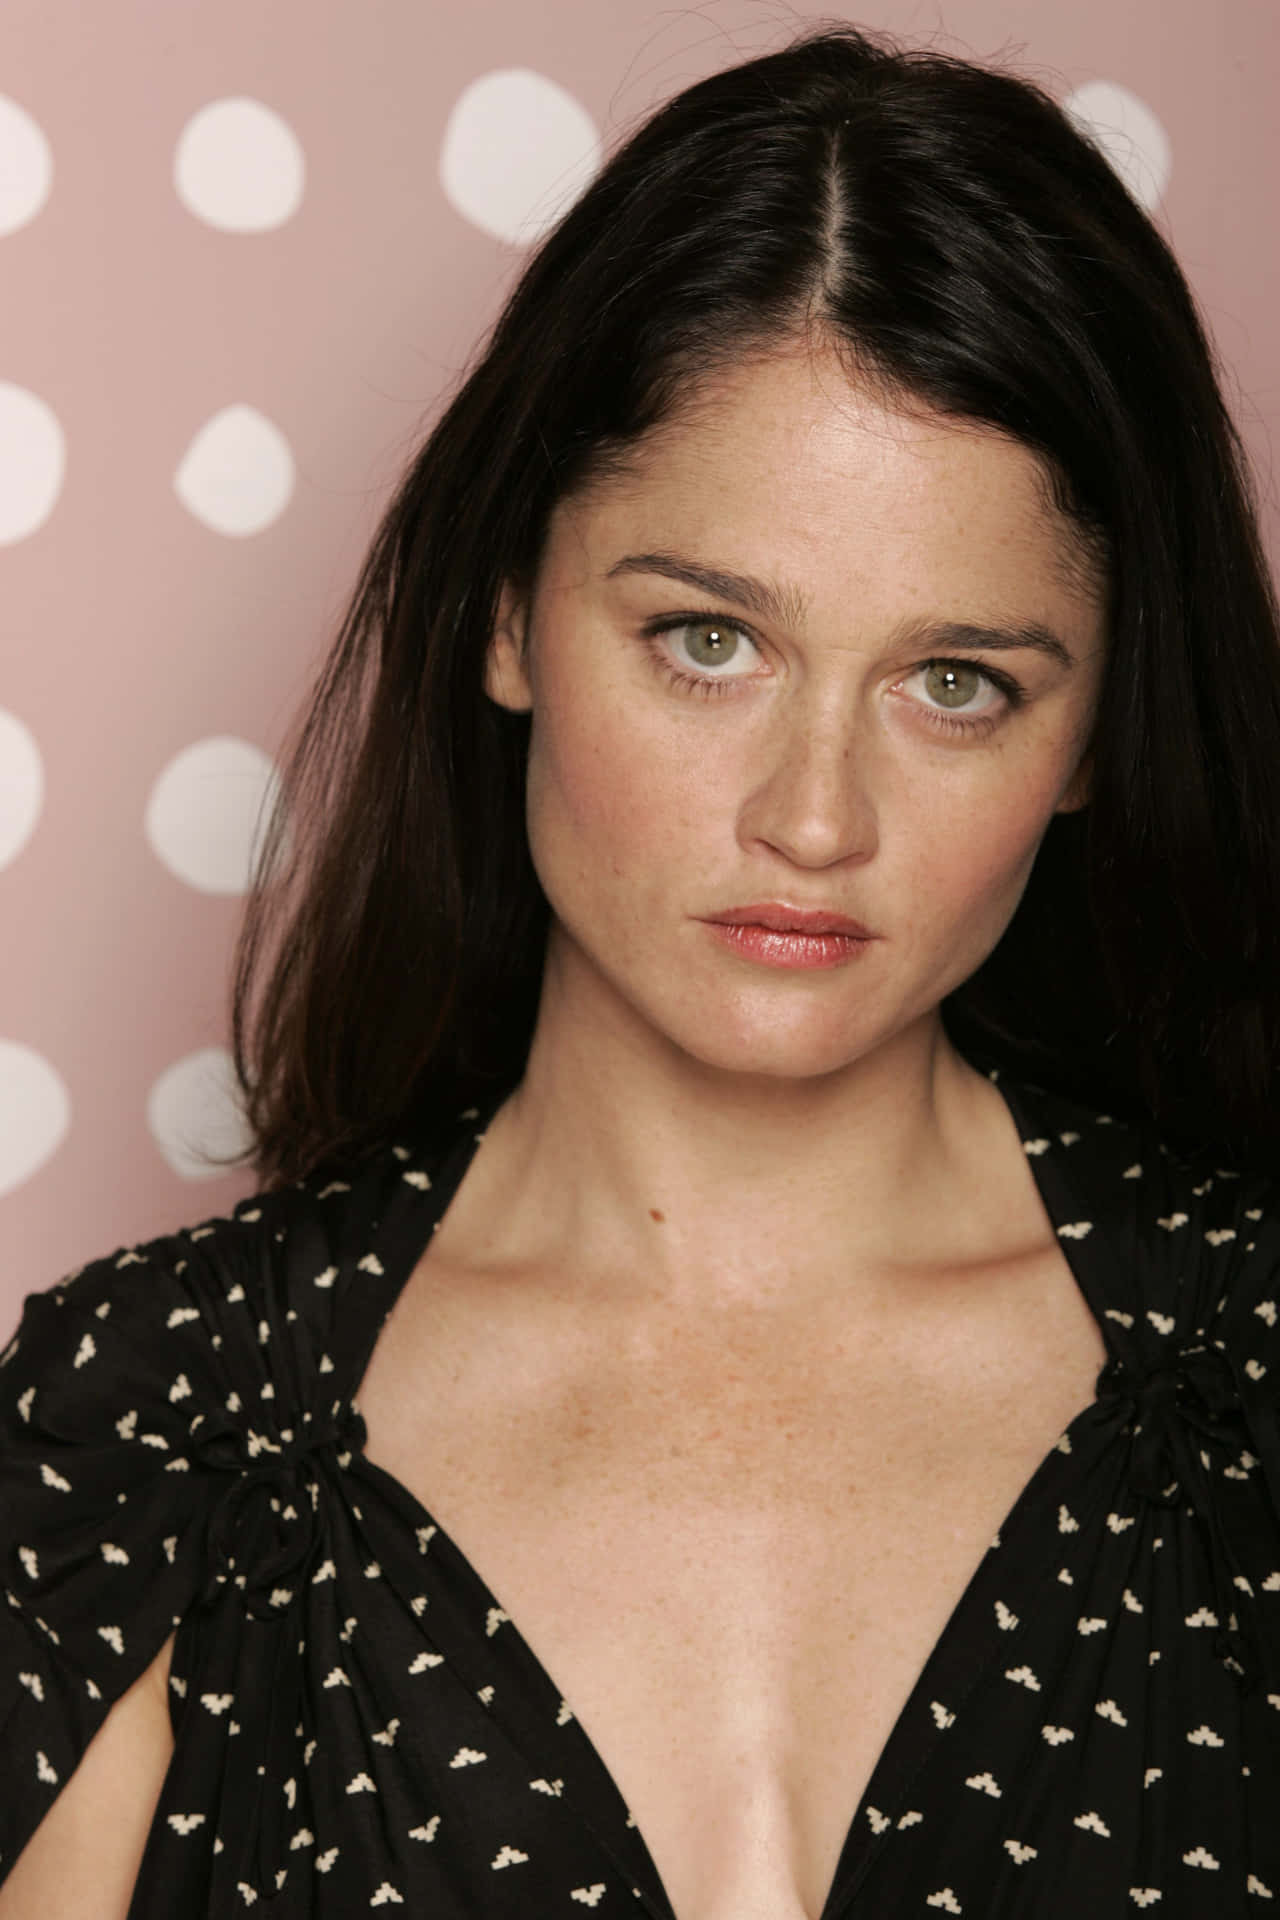 Robin Tunney posing for a photoshoot Wallpaper